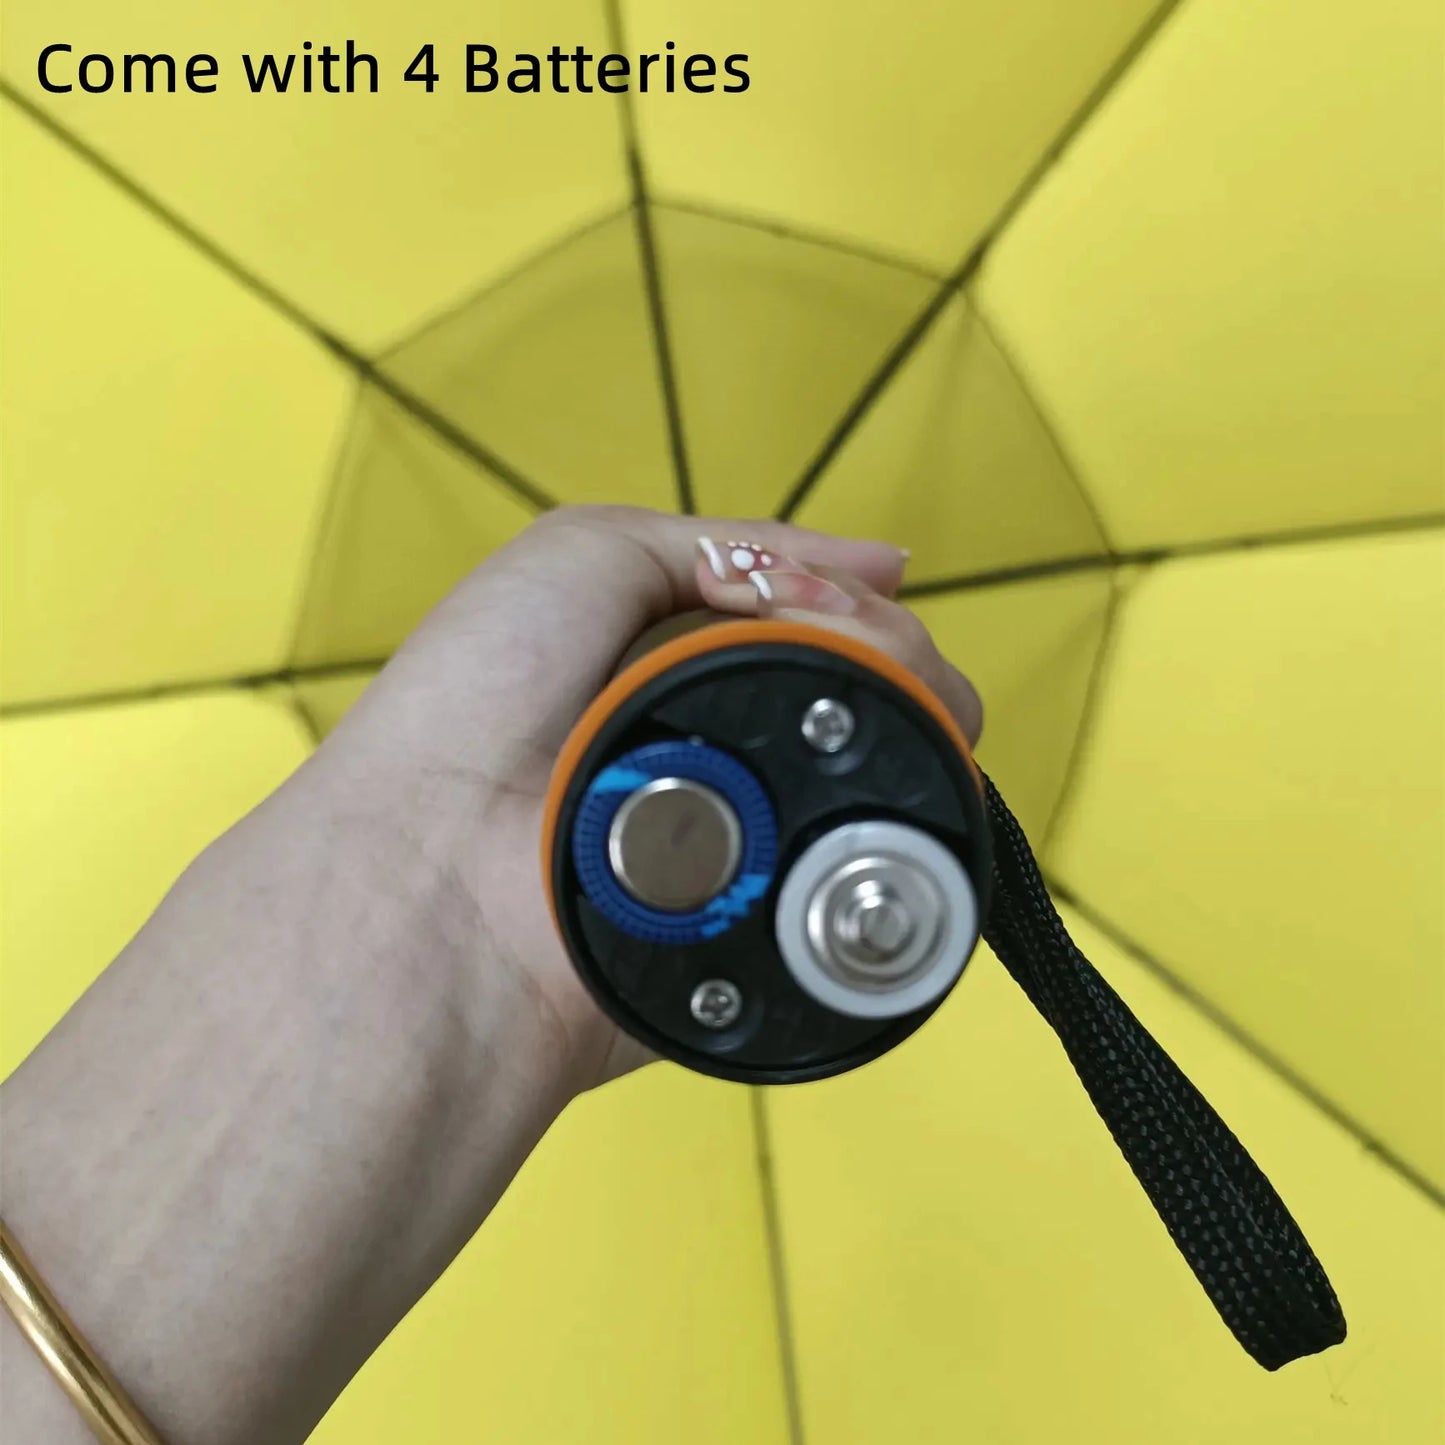 The Creative Summer Umbrella with Fan and Mist Spray, showing it comes with four AA batteries. These batteries power the fan and mist spray functions, ensuring cool comfort all day long.